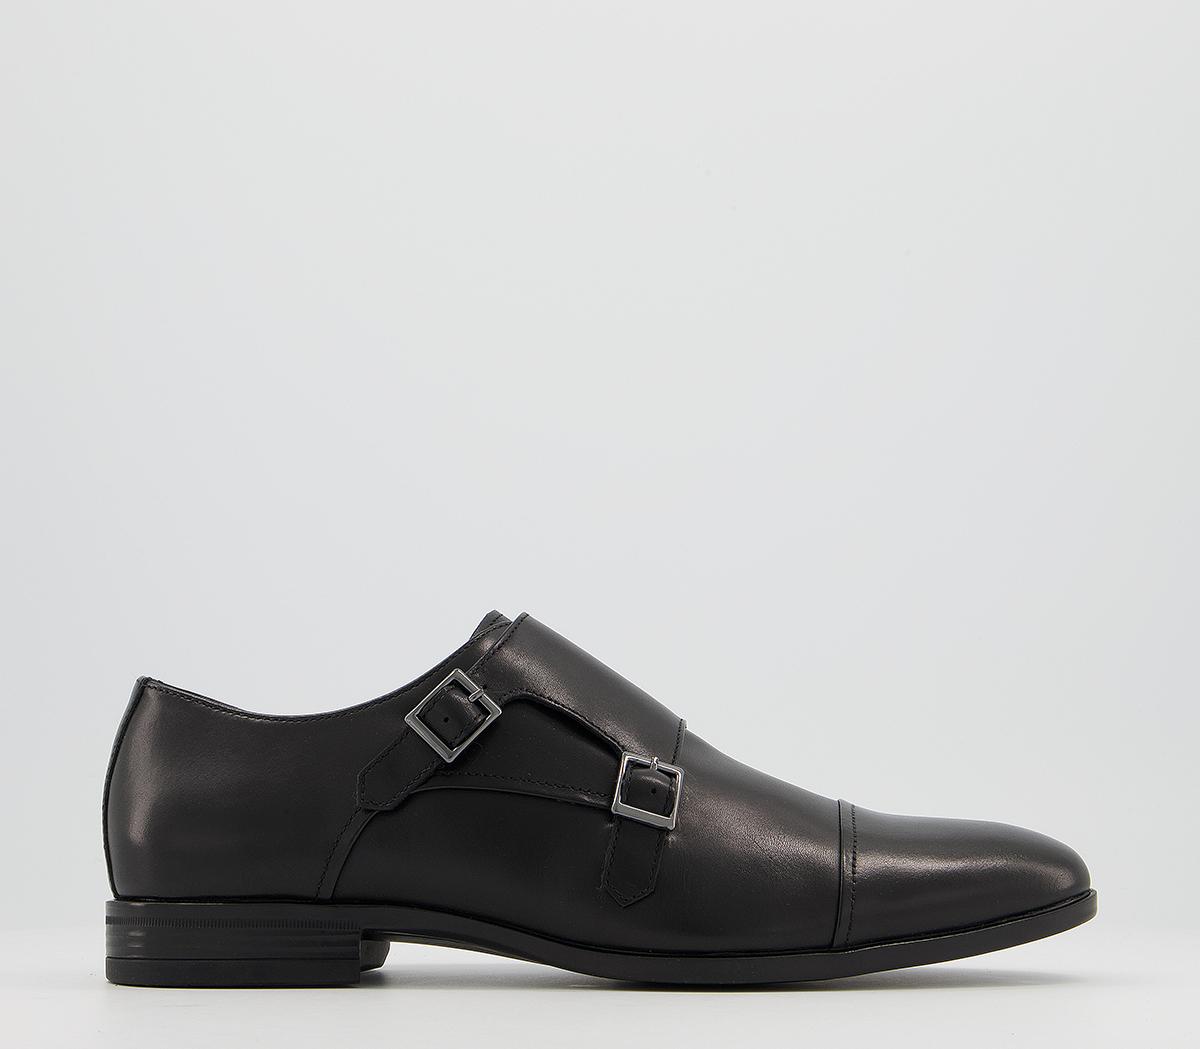 OFFICE Maddison Black Leather - Men's Casual Shoes